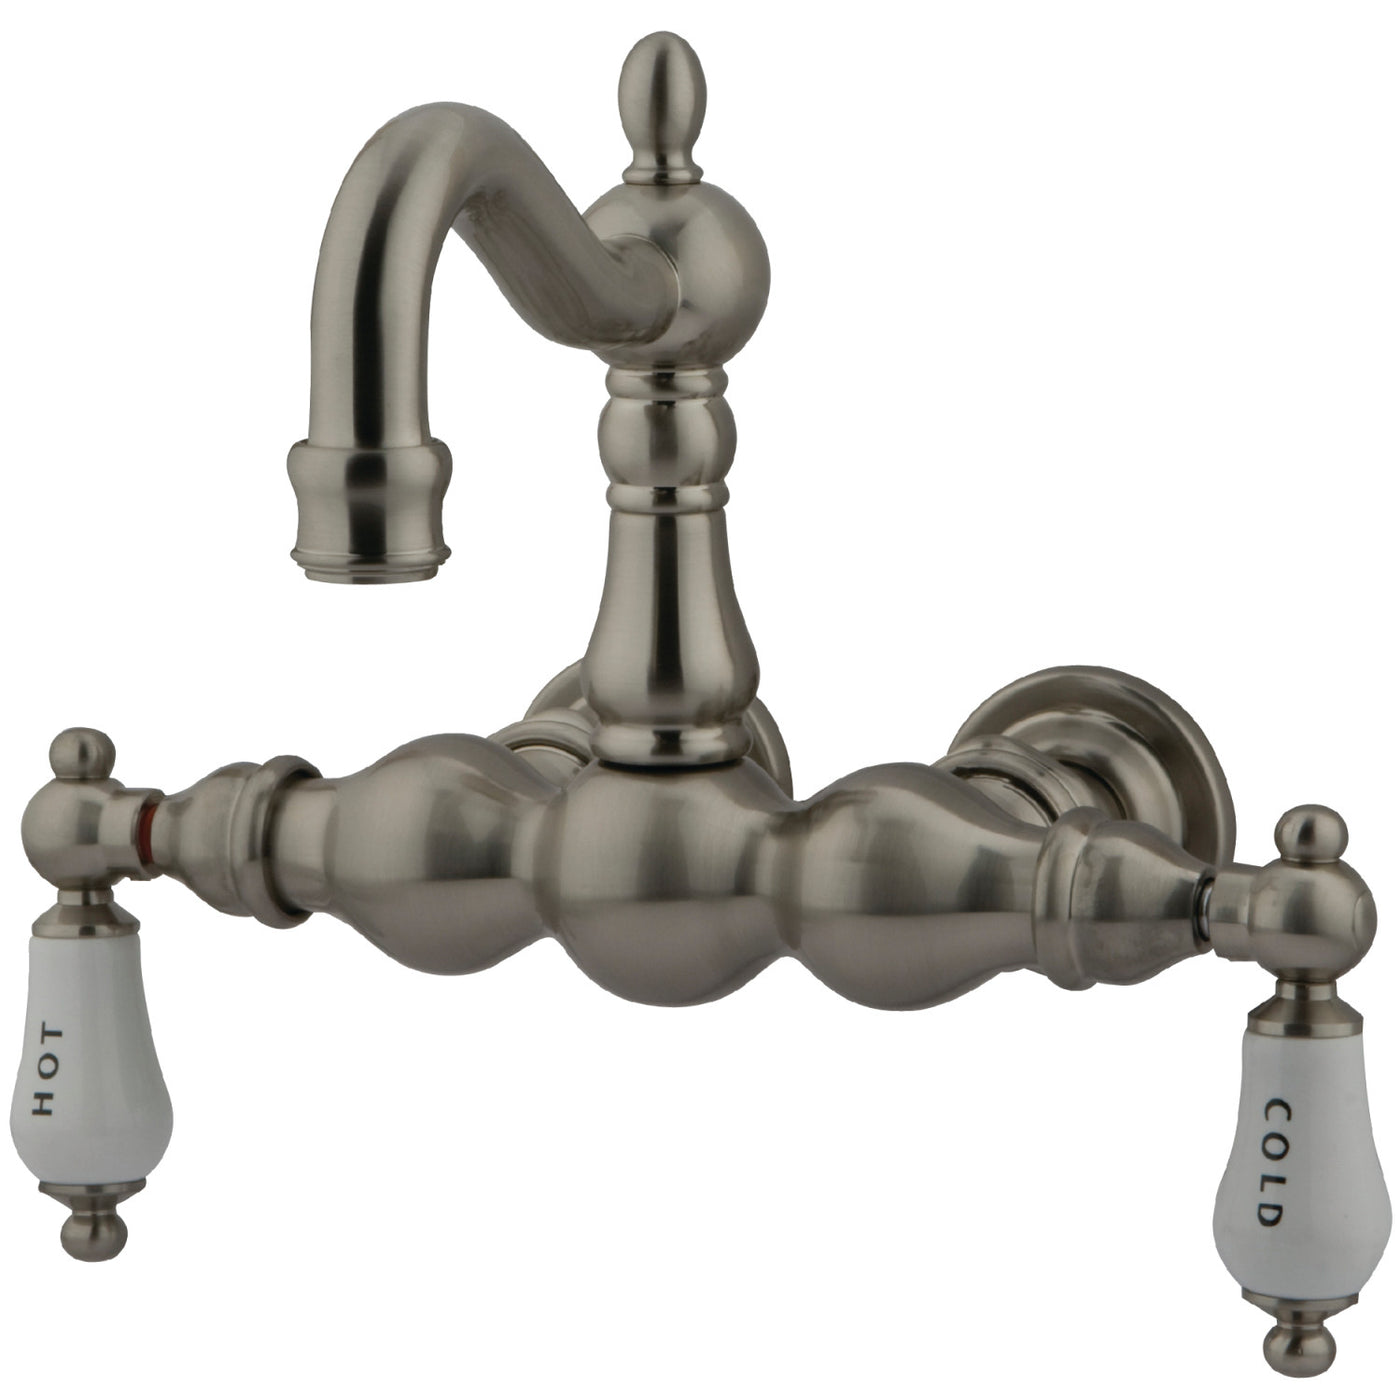 Elements of Design DT10018CL 3-3/8-Inch Wall Mount Tub Faucet, Brushed Nickel